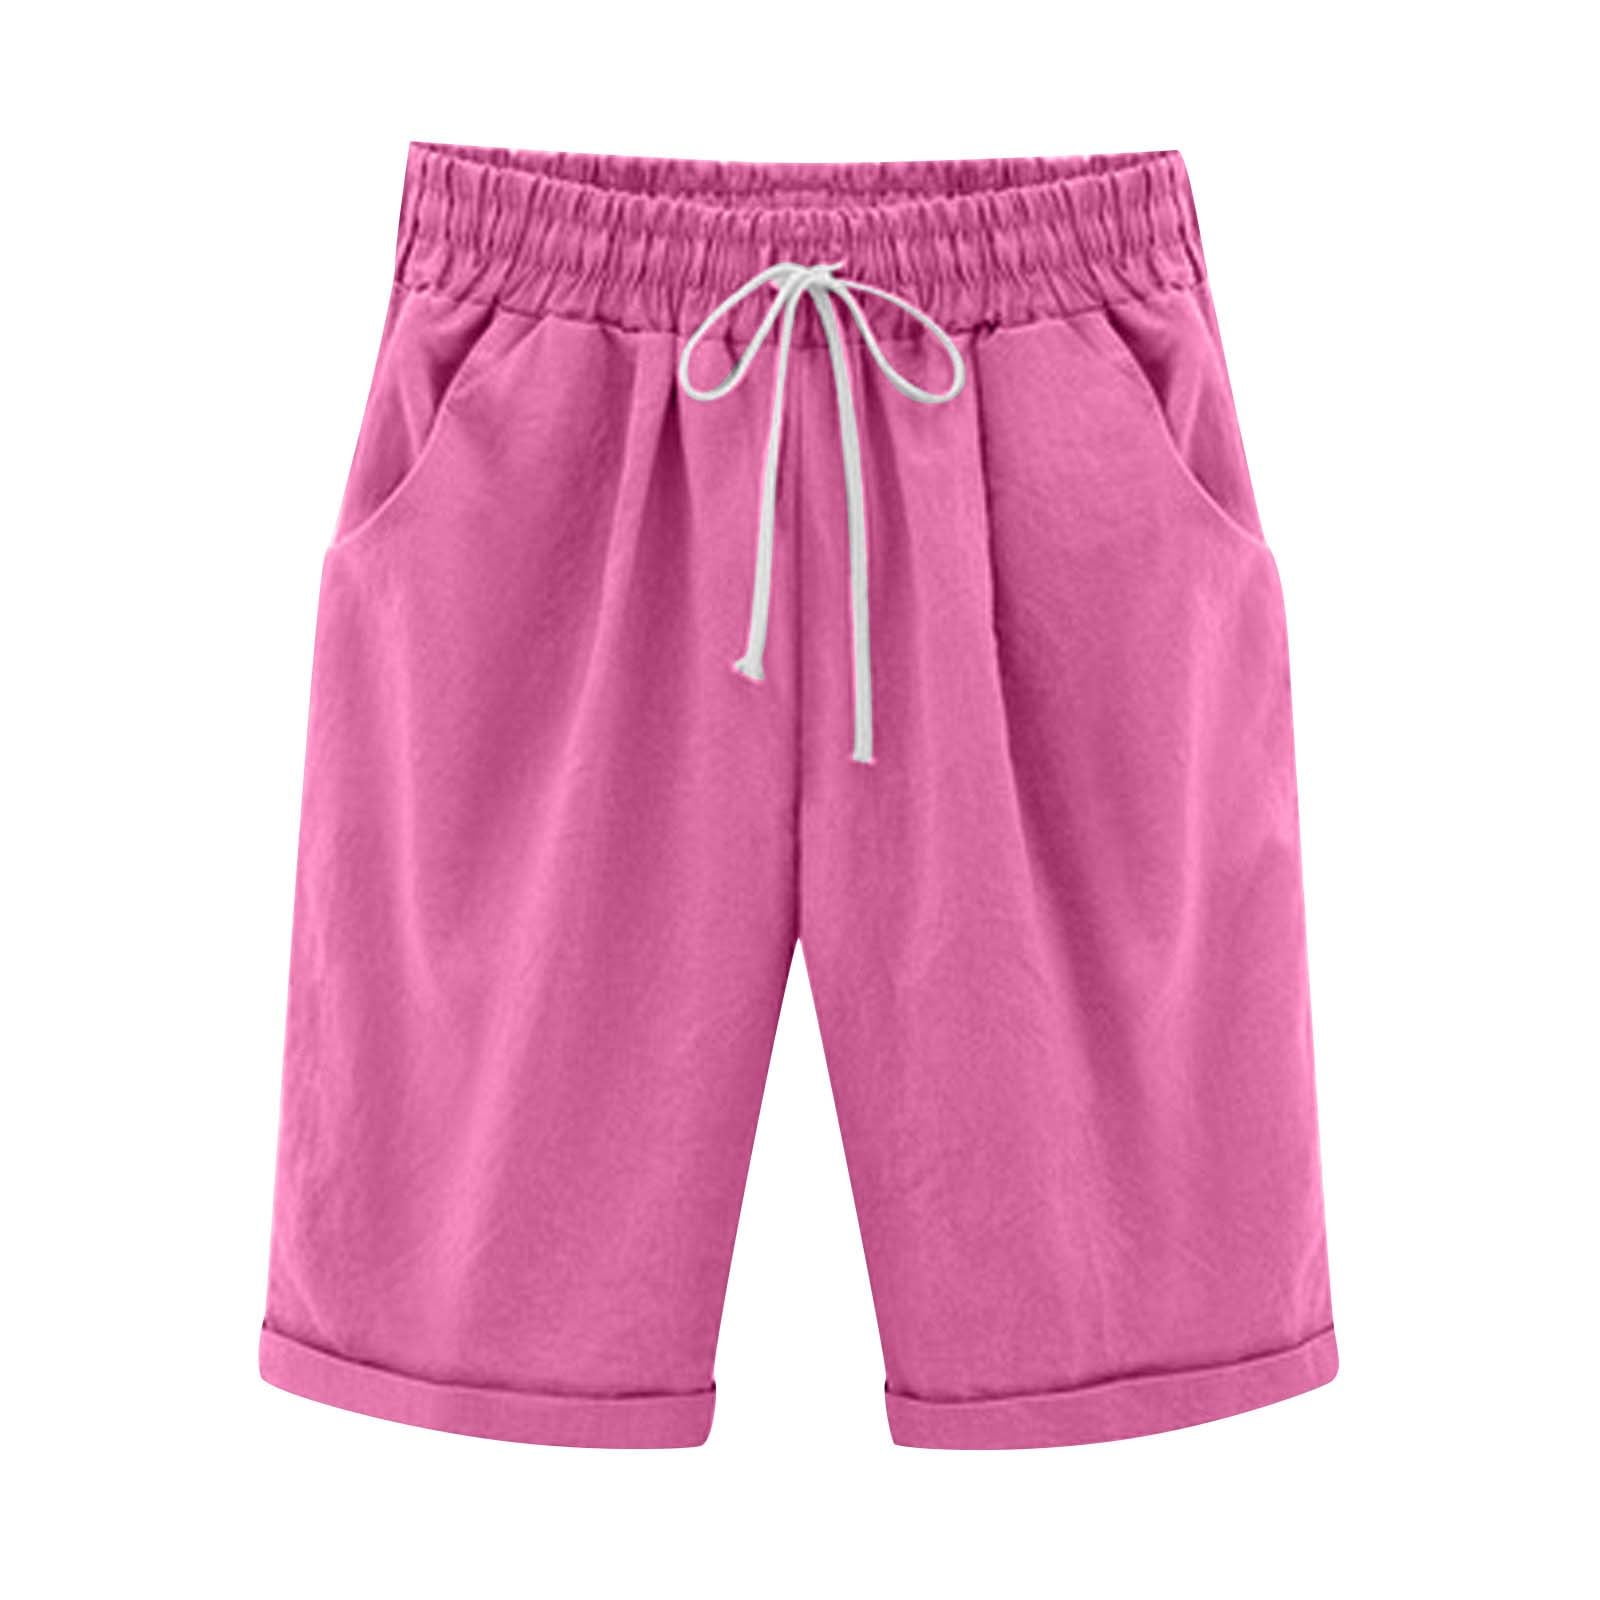 The Cutest Pink Shorts You've Ever Seen